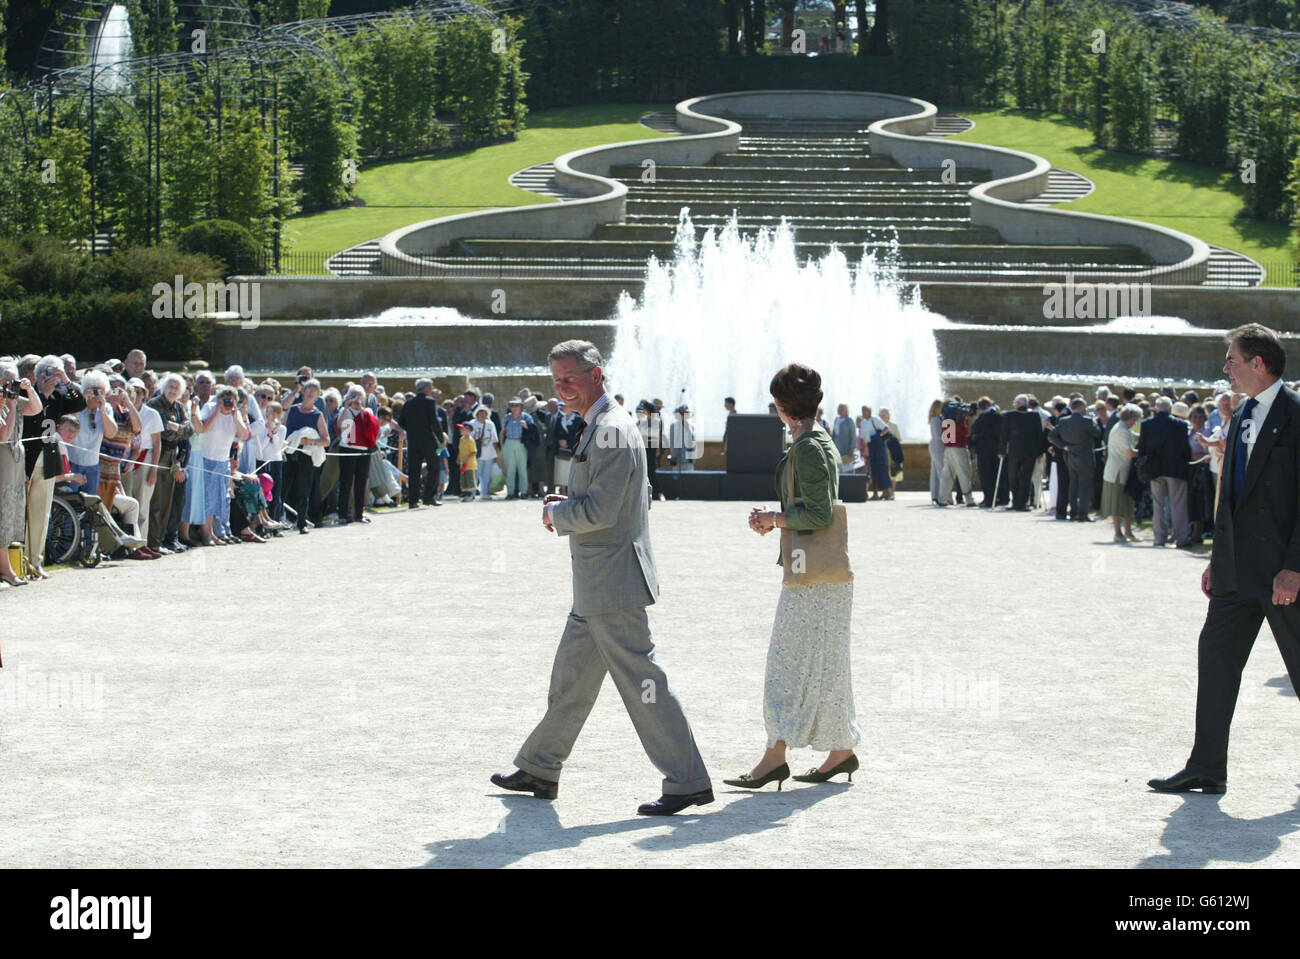 The Prince of Wales at Alnwick Gardens, where he opened the historic walled garden in the grounds of the estate of the Duchess of Northumberland (centre), who planned the seven-year 14 million project to restore the property to its former glory. * A central feature of the garden is a huge cascade of water, complete with fountains, which are believed to be the largest of its kind in this country. It took 150,000 man hours to complete and 7,260 gallons of water tumble down its 30 weirs every minute. Since the garden opened to the public in October last year almost 250,000 visitors have come Stock Photo